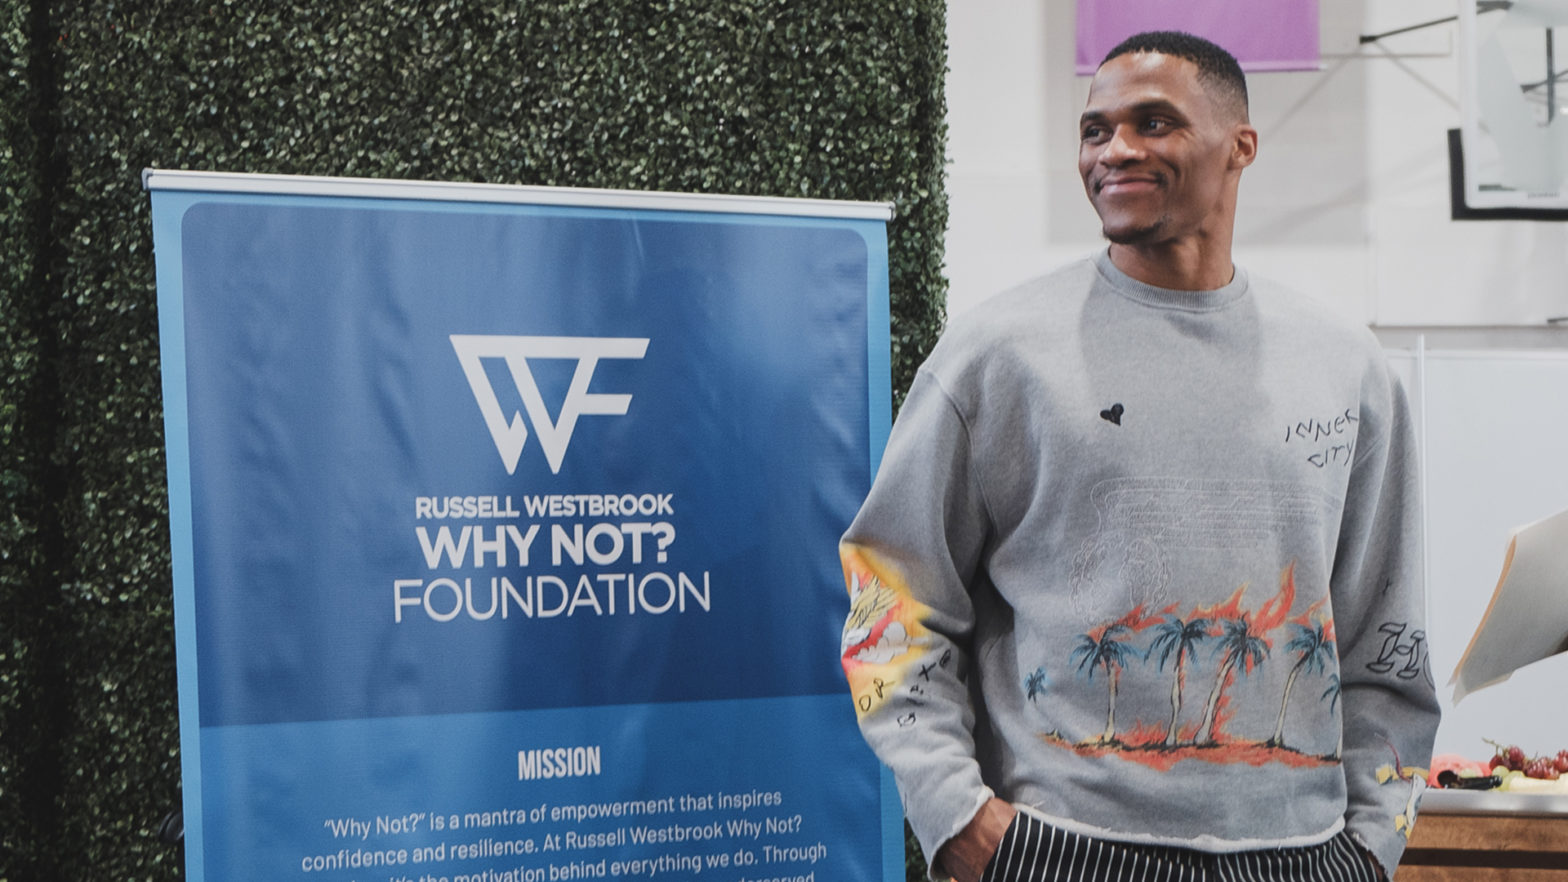 Russell Westbrook, LeadersUp Team Up To Equip South LA Youth With Career Resources To Succeed